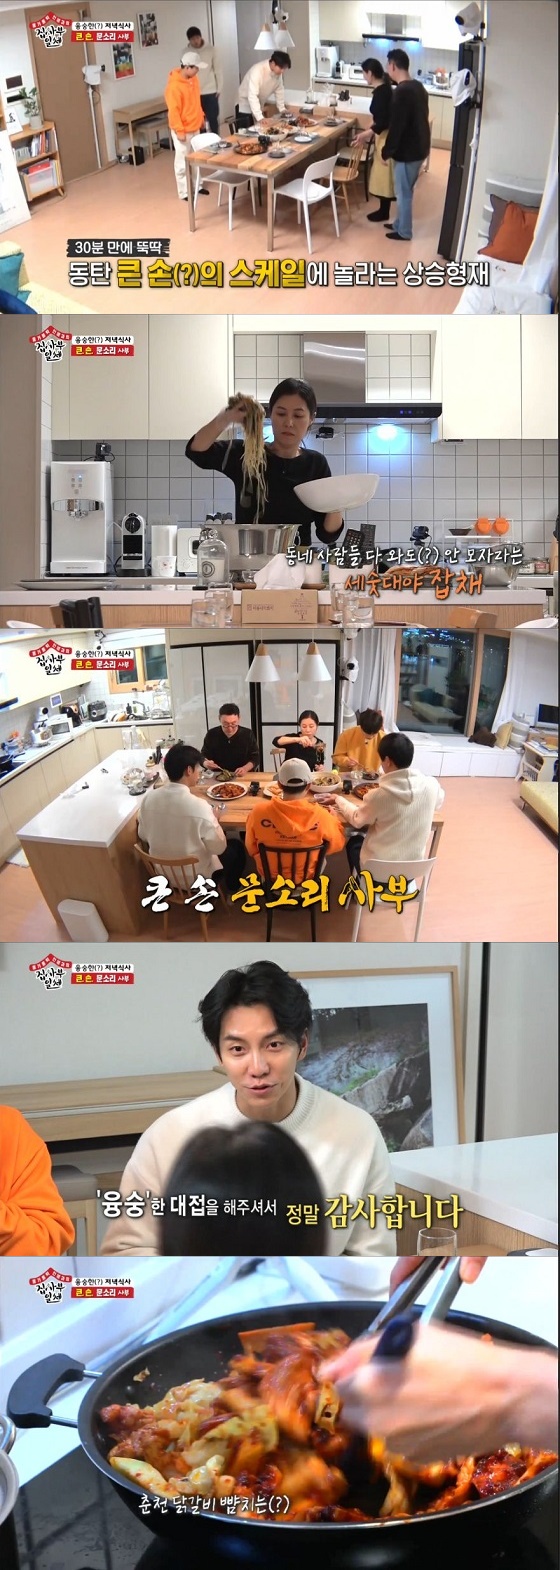 Actor Moon So-ri boasted an extraordinary Big Hand cooking skill.In the SBS entertainment program All The Butlers, which was aired on the afternoon of the 5th, the All The Butlers team who visited Moon So-ris house was broadcast.Lee Seung-gi, Yang Se-hyeong, Lee Sang-yoon and Yook Seong-jae visited the Moon So-ri couples house and Moon So-ri unveiled a dinner prepared in 30 minutes.The dinner menu was served in a variety of Dak-galbi, chowfish, raw oysters and kimchi kimchi.The Moon So-ri served their food in a familiar way, saying that guests were invited to their daily lives; Moon So-ris raw oyster recipe, which contained hot sauce and lemon juice, also offered a different taste.Especially, it attracted the members with the extraordinary Big hand scale. It was a amount reminiscent of the so-called Sesame Daeya.Yang Se-hyeong liked it, saying, Its a sheep I really like.Lee Seung-gi said, I have never said this since the military, and expressed his gratitude for thank you for your gentle treatment.